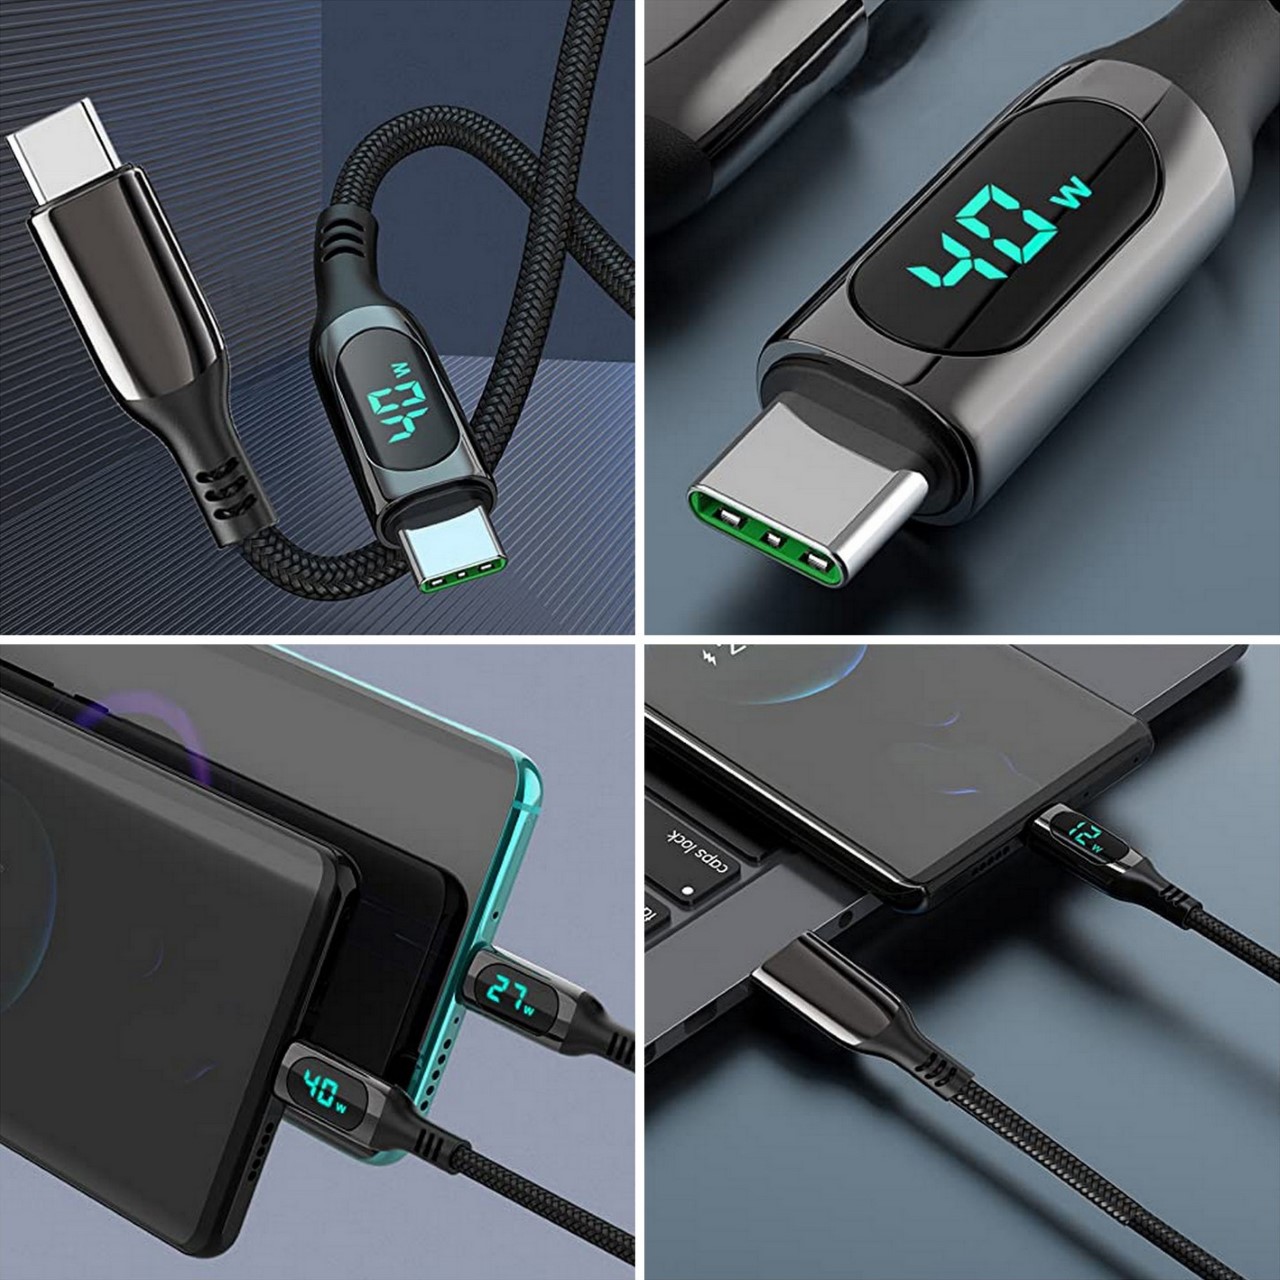 https://www.yankodesign.com/images/design_news/2022/04/chipofy-usb-c-cable-with-led-display/chipofy_usb_c_cable_led_display_5.jpg